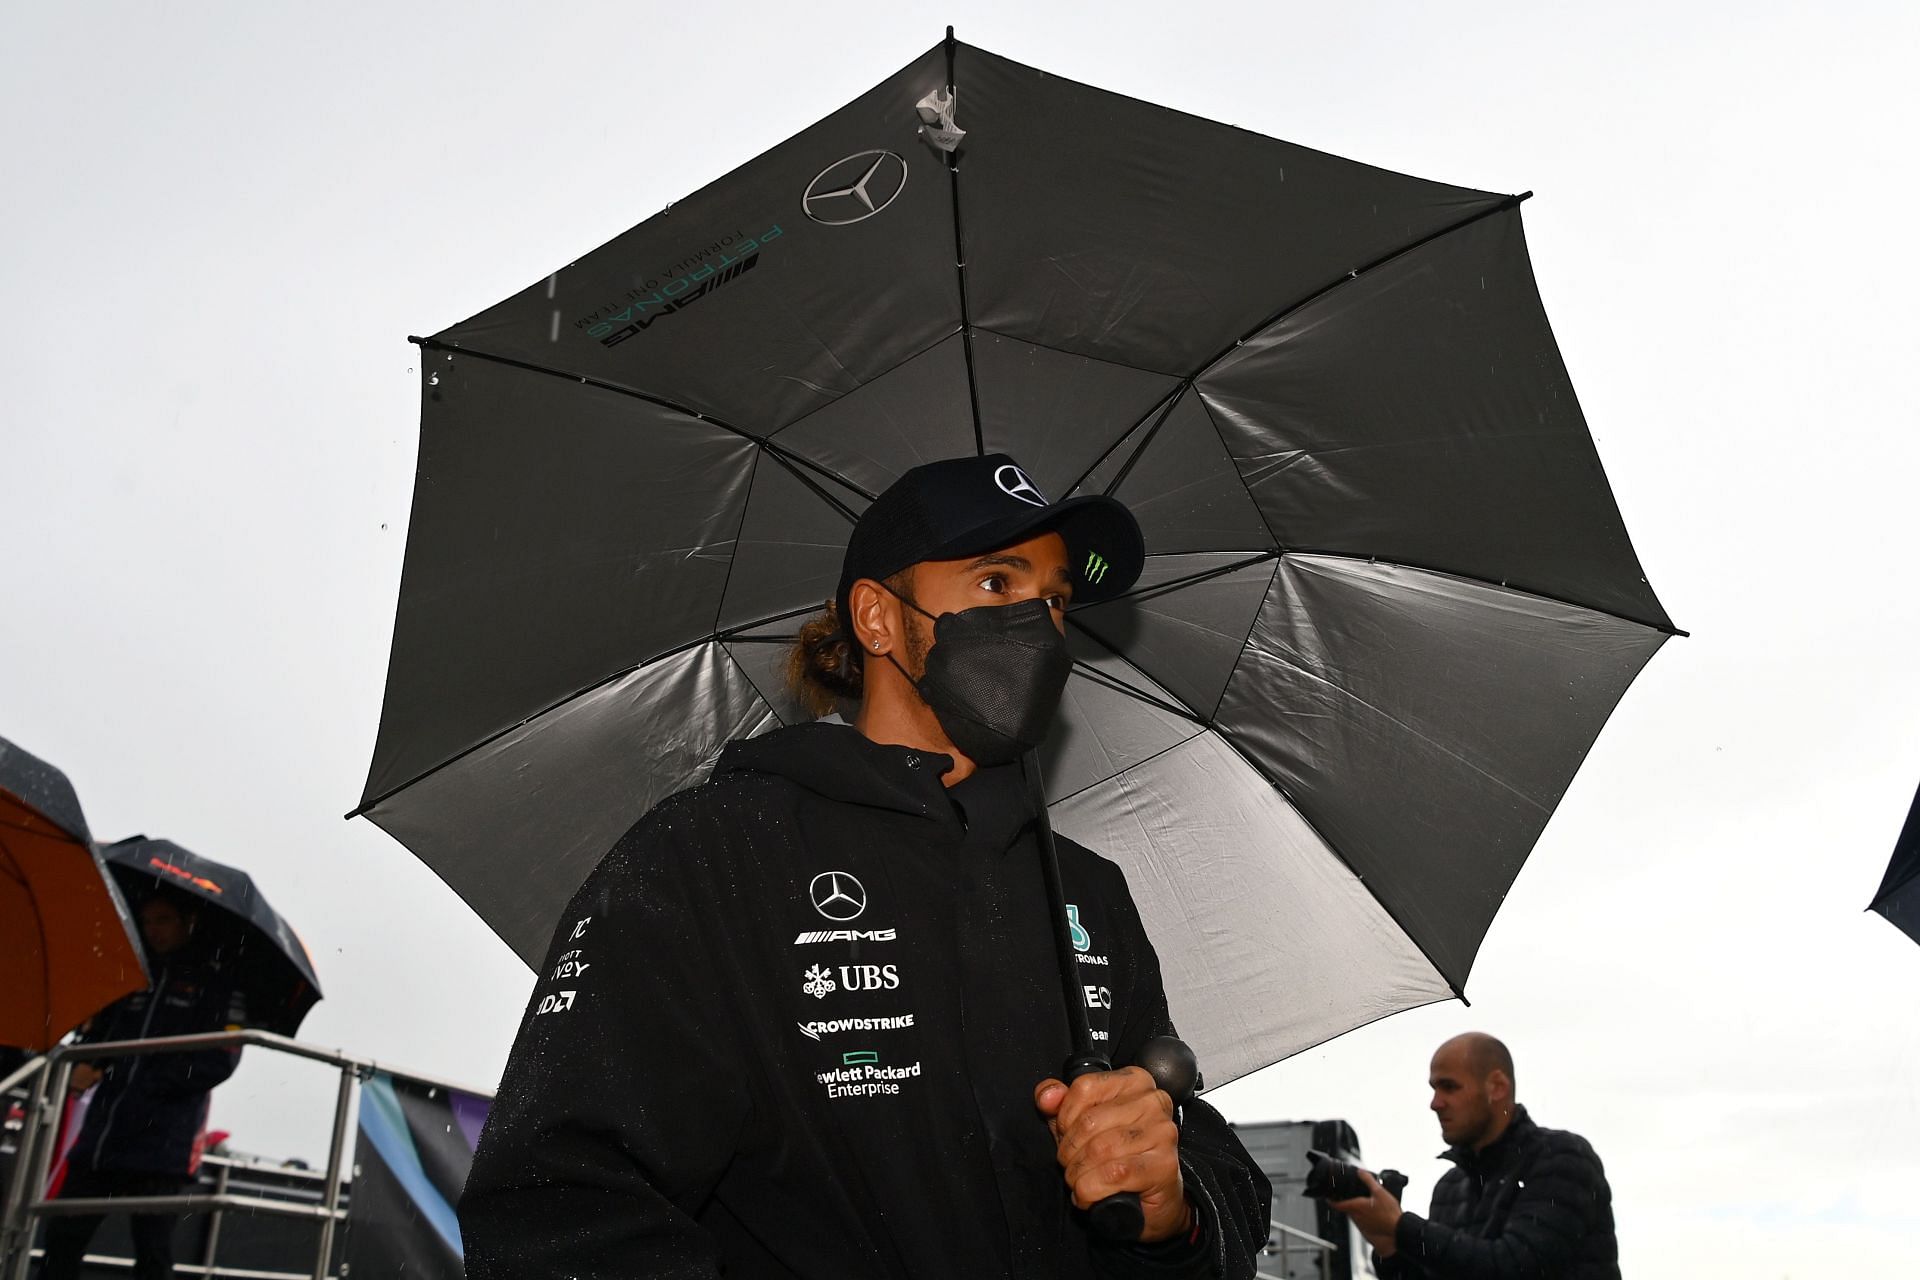 Lewis Hamilton has seen his status as the standard-bearer of F1 diminish in the last two seasons